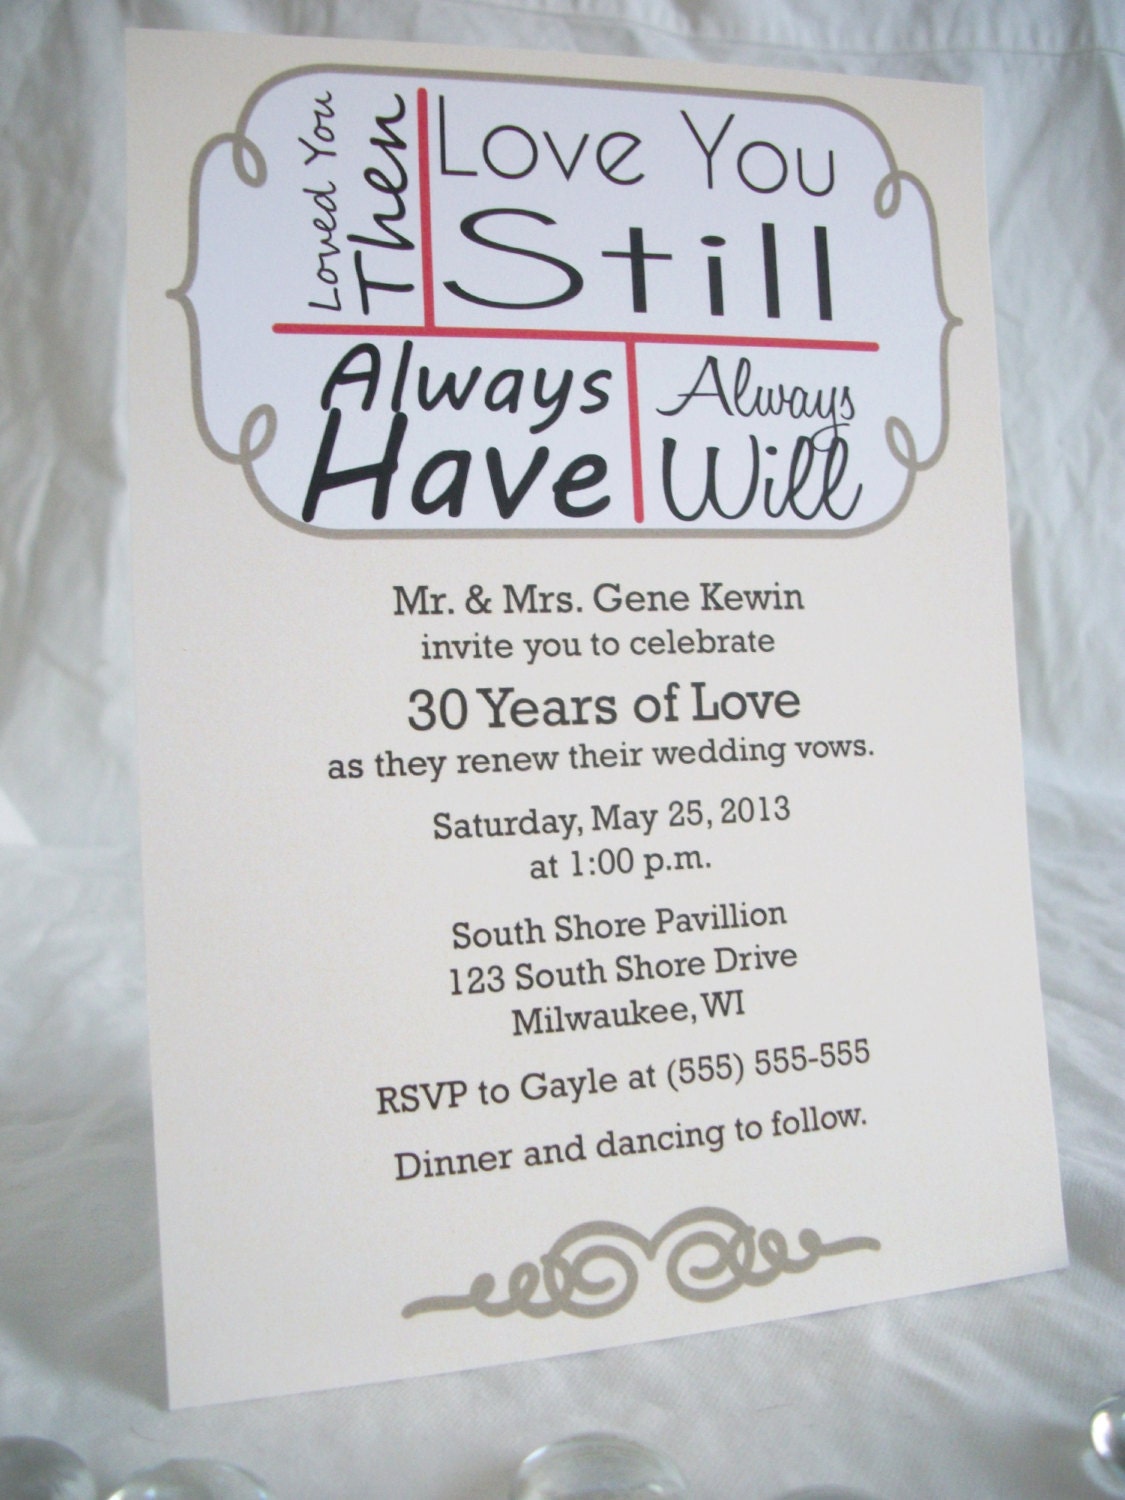 24-love-you-still-vow-renewal-invitations-onepaperheart-stationary